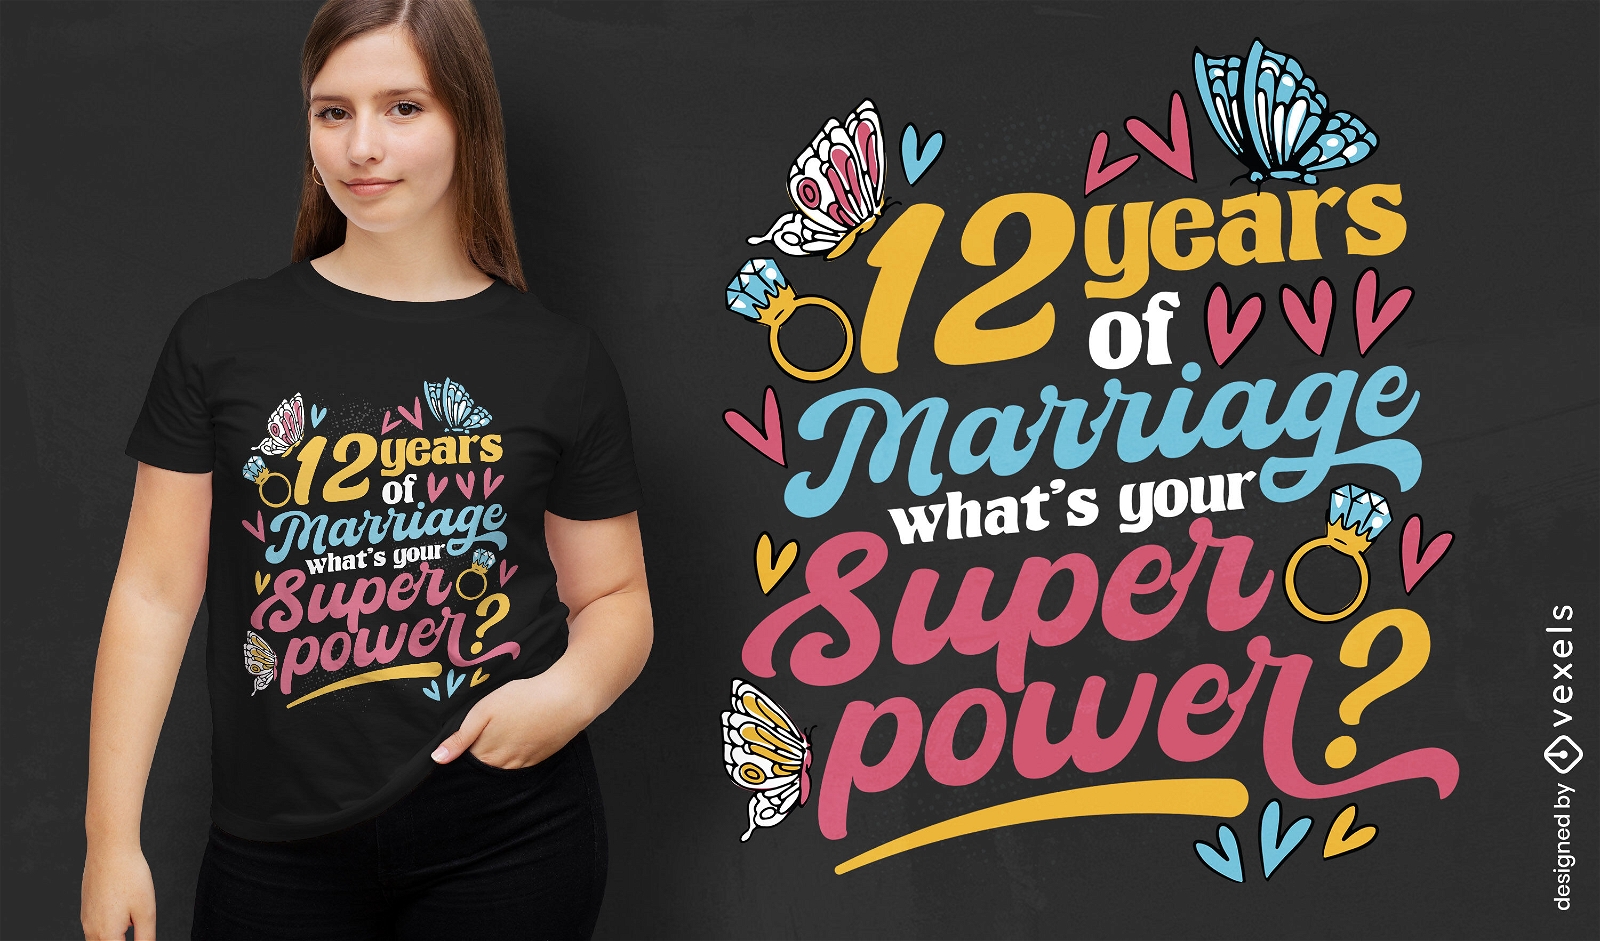 12 Years of marriage t-shirt design